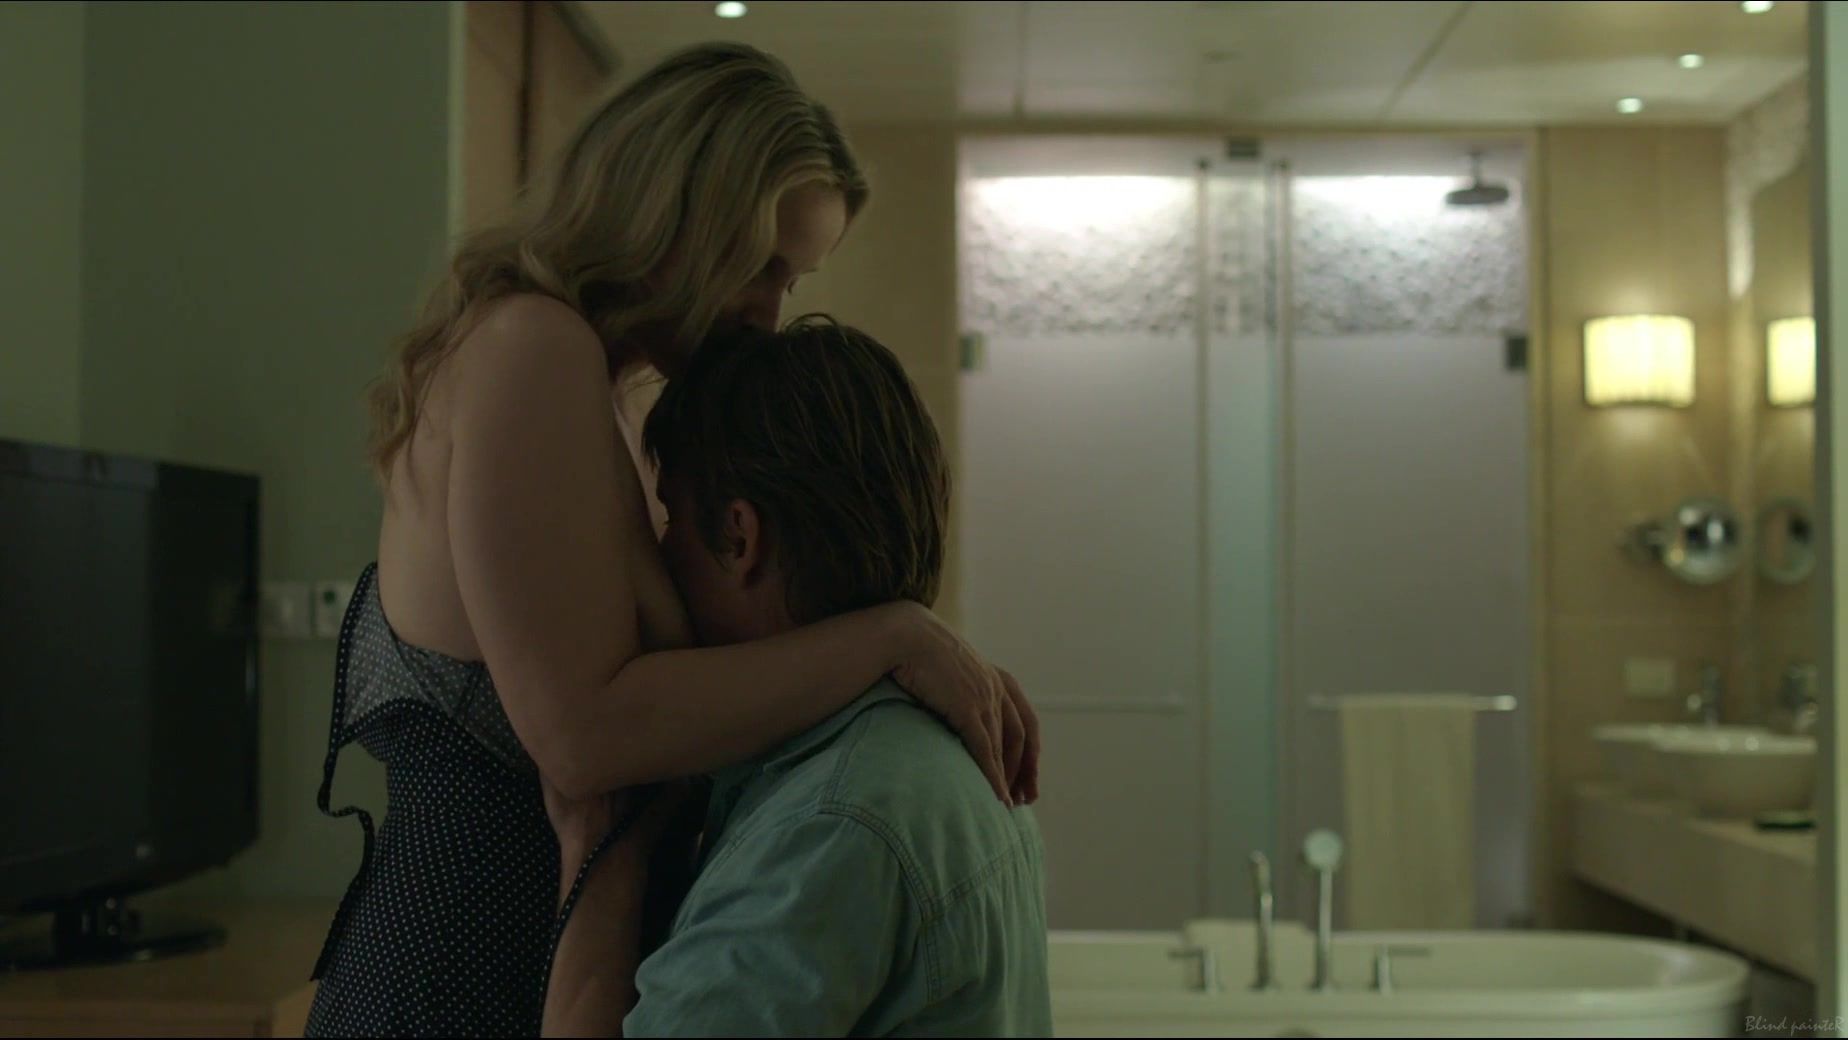 OnOff Julie Delpy nude - Before Midnight (2013) Uniform - 1